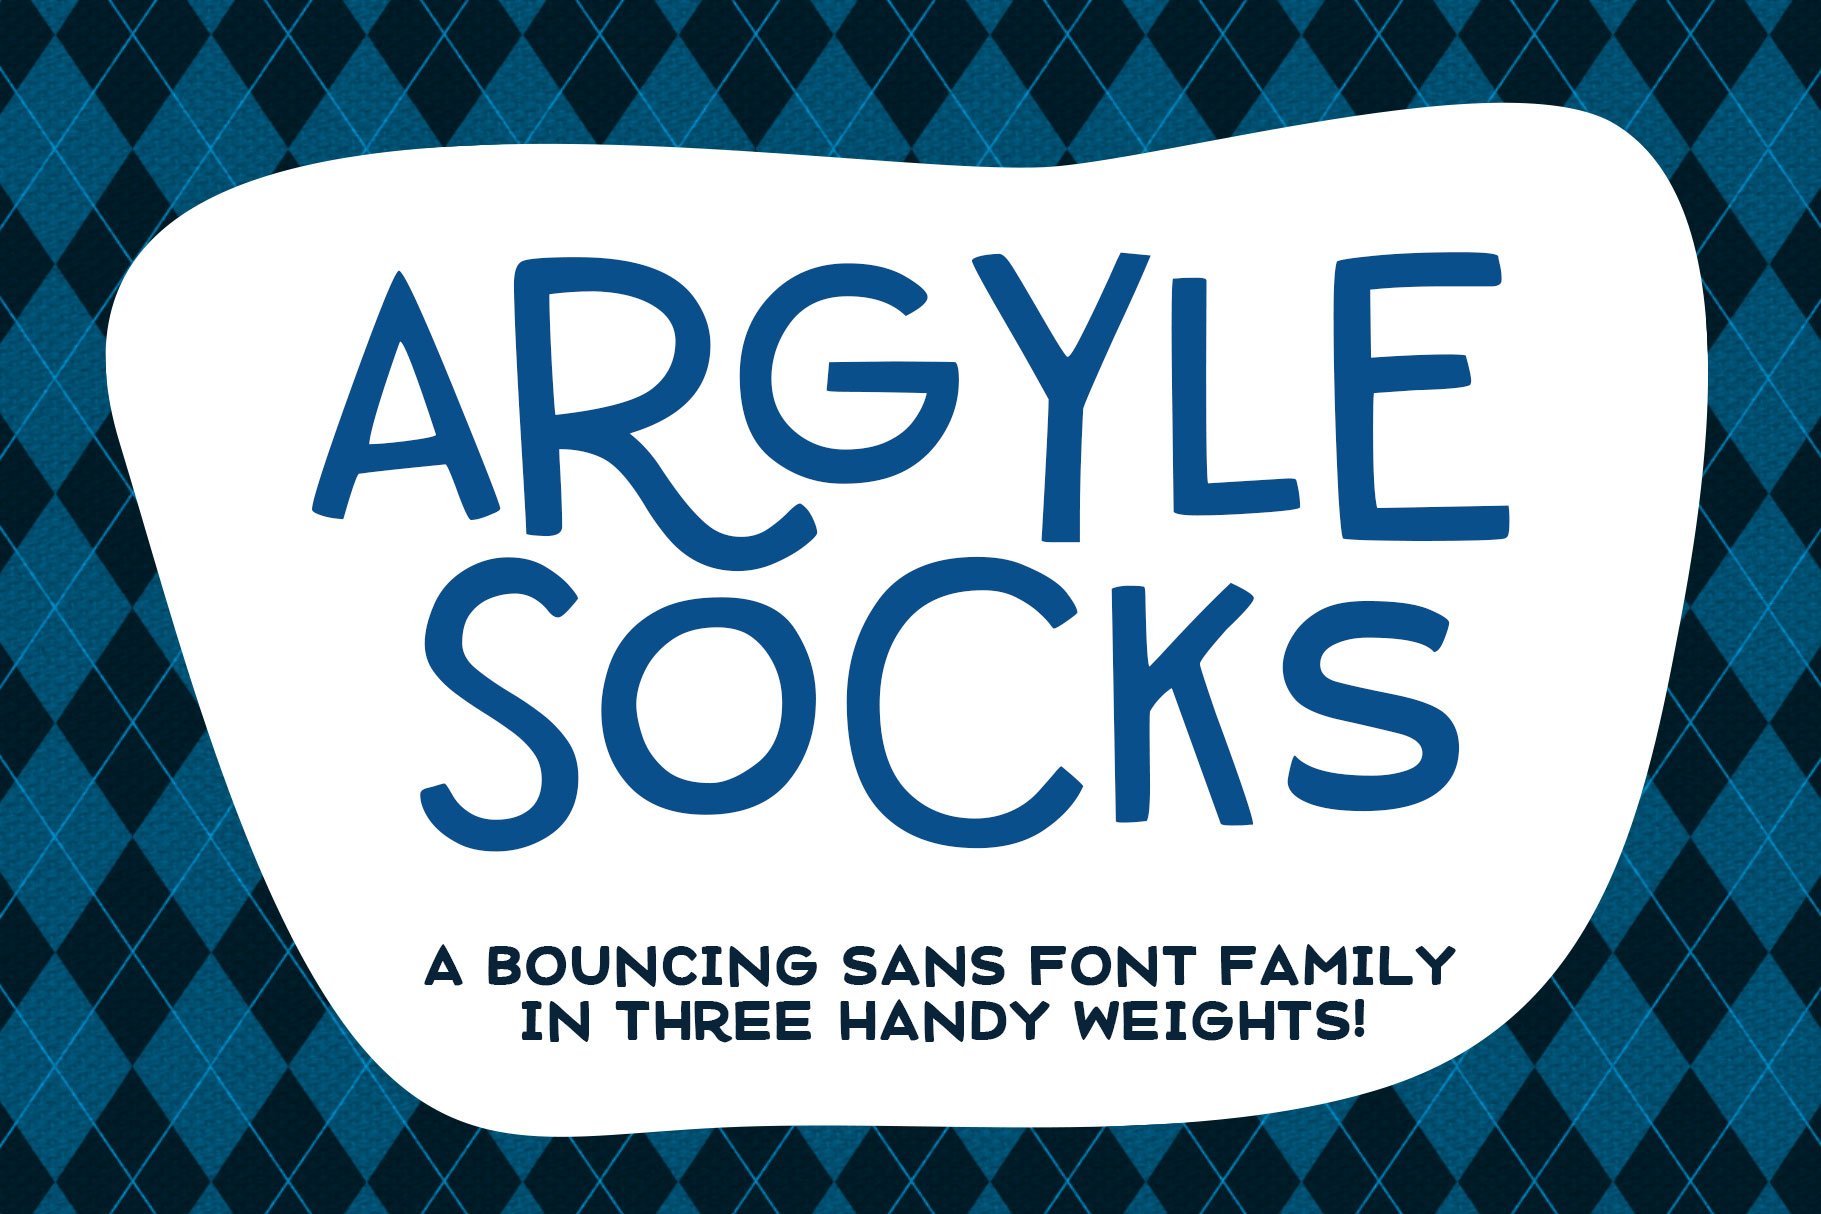 Argyle Socks: fun font in 3 weights! cover image.